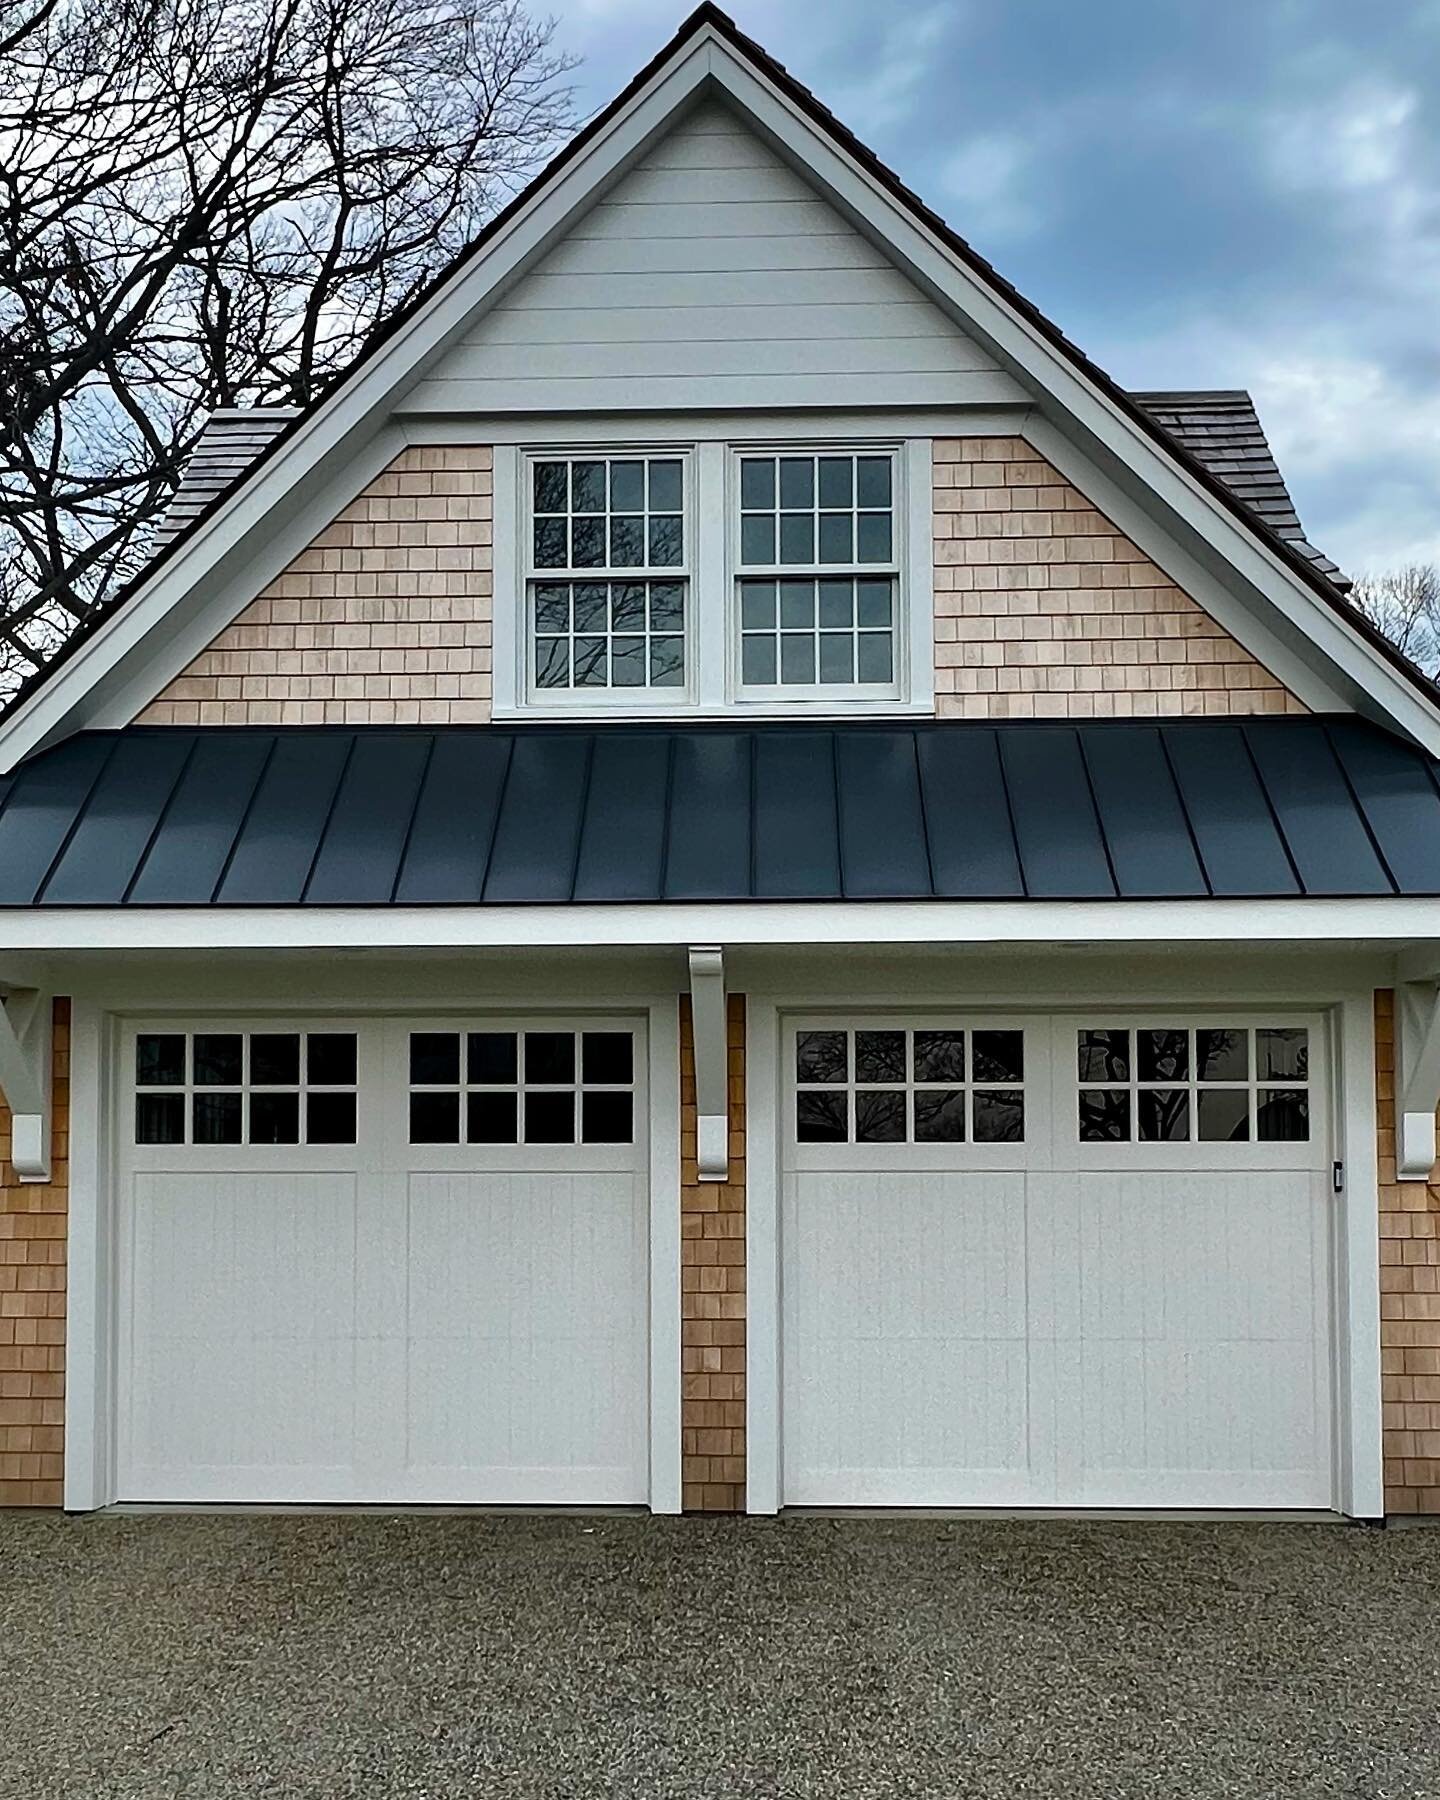 Just a simple and classic design&hellip; these doors are a stones throw away from the salt water. The doors are made of versatex to look and feel like wood- without the upkeep. They will not rot, warp or crack like wood can. ⁣
⁣
⁣
⁣
⁣
#designergarage